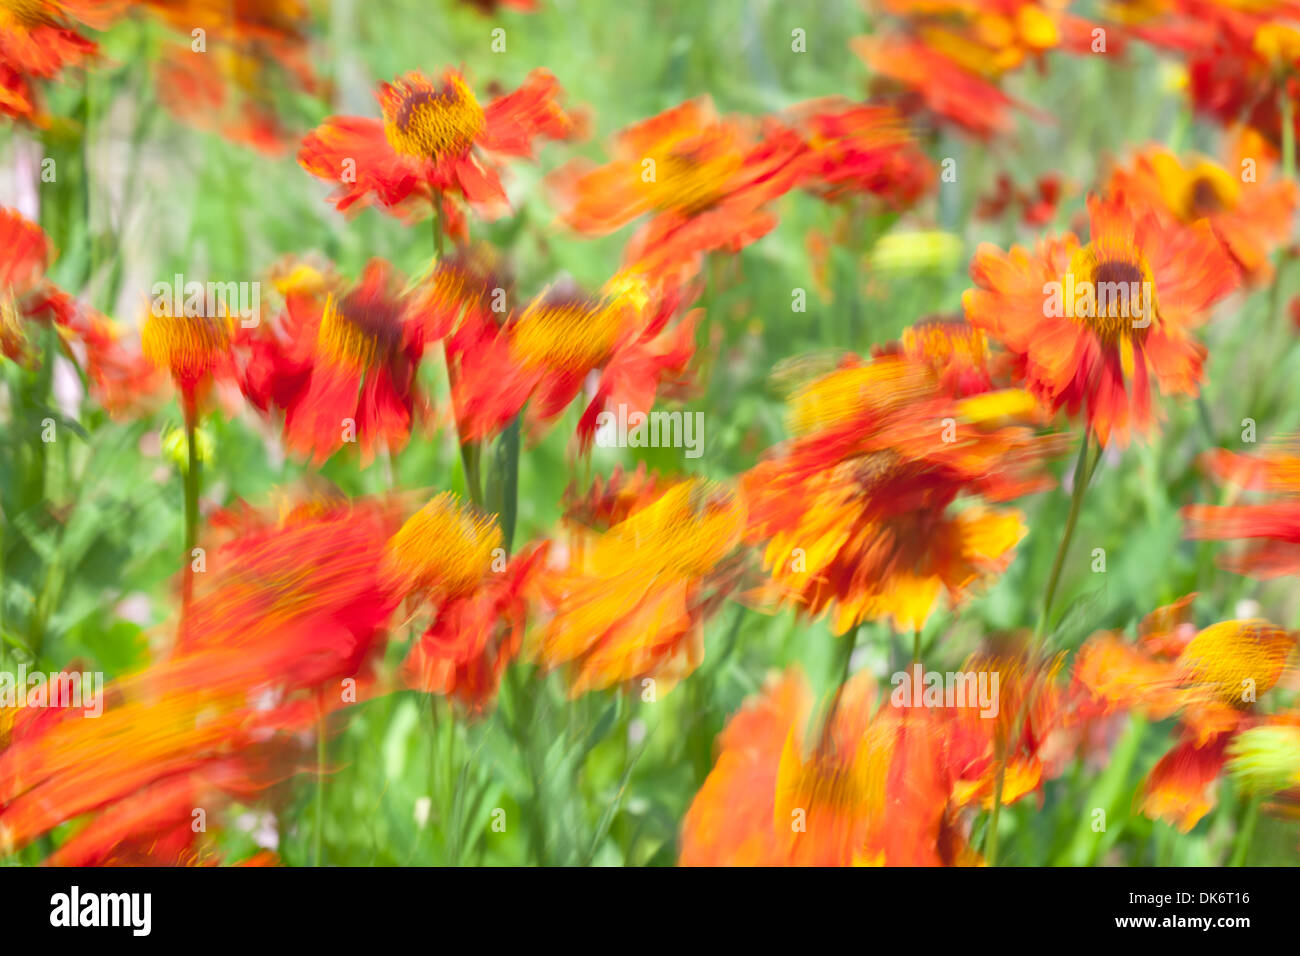 Common sneezeweed, Helenium autumnale, blowing in the wind Stock Photo